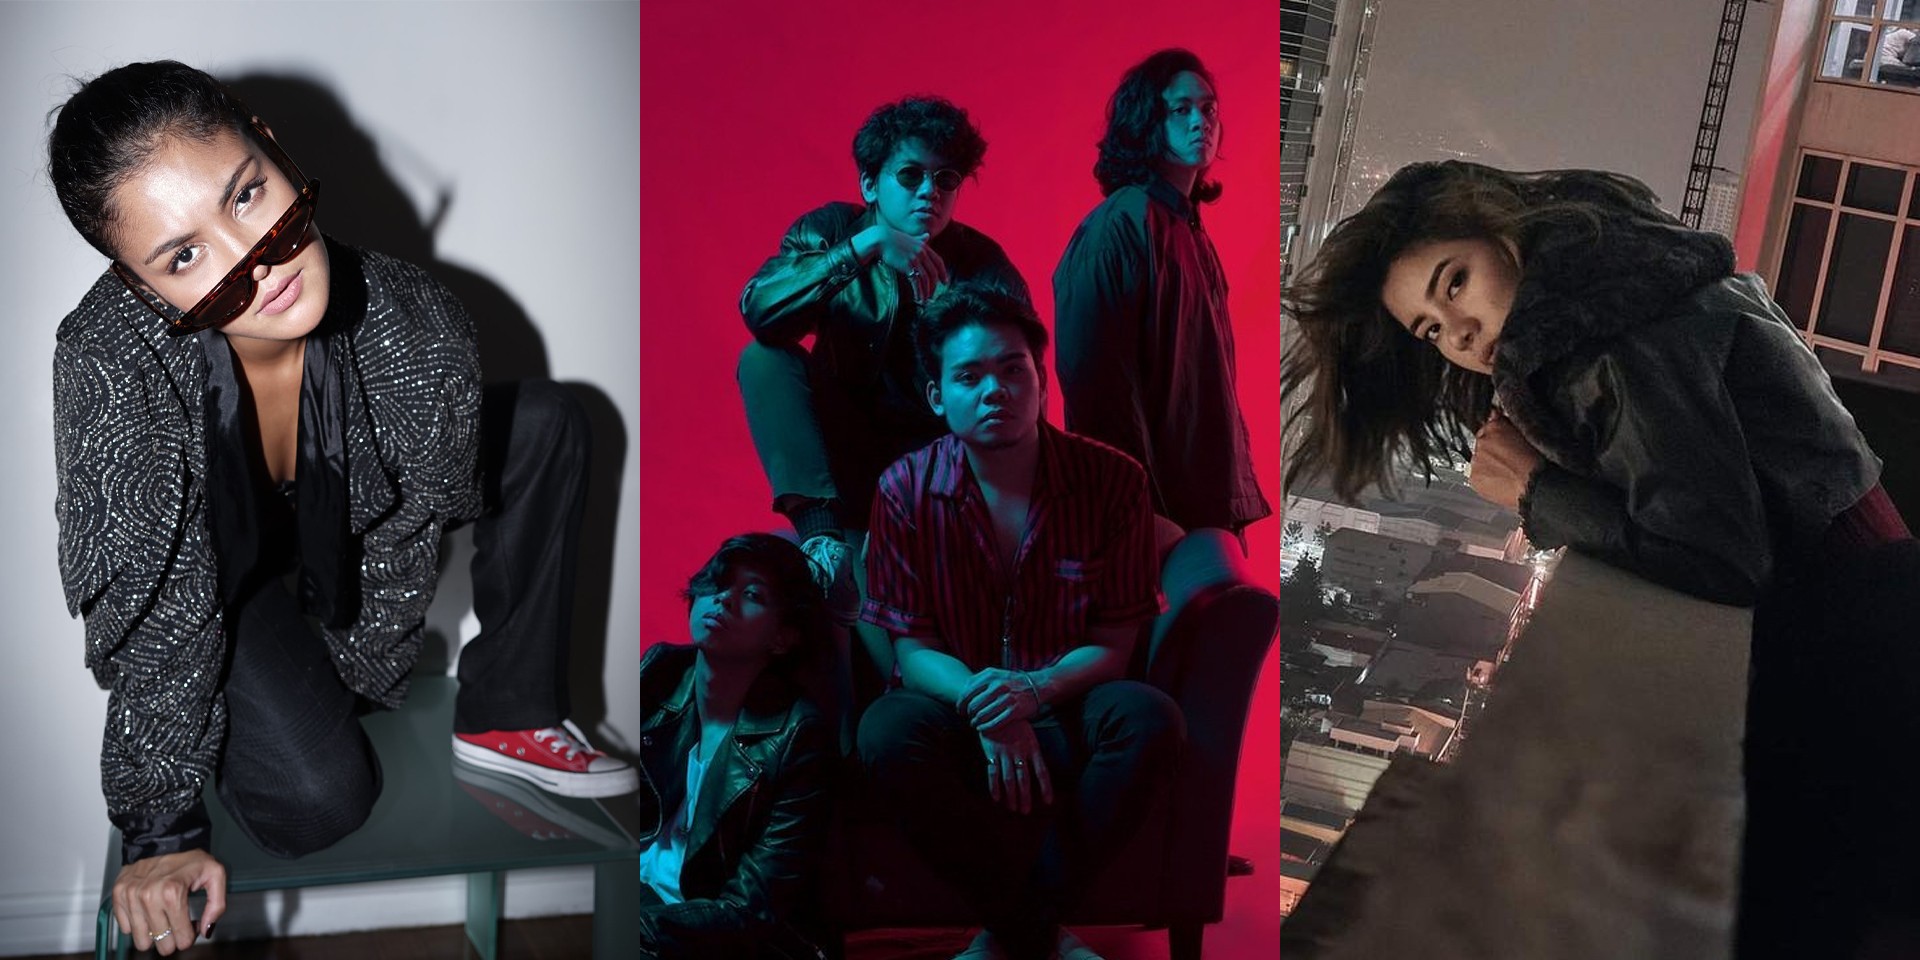 Keiko Necesario, One Click Straight, Kiana Valenciano, Itchyworms, and Quest to perform at Music Matters in Singapore